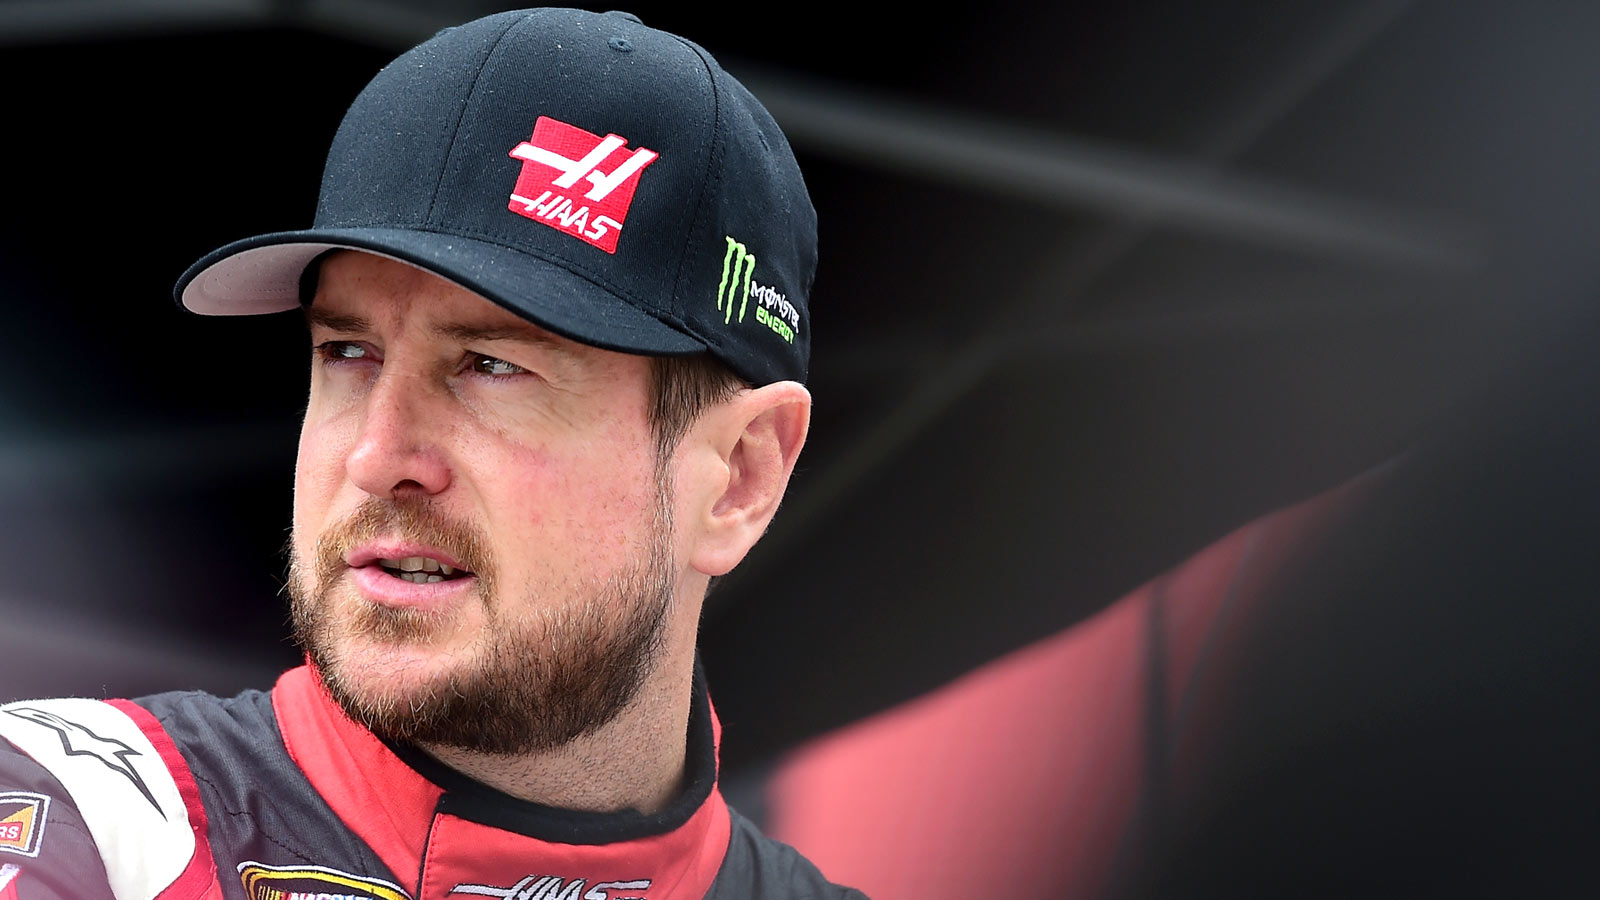 Last second chance: Kurt Busch needs to make the most of this opportunity